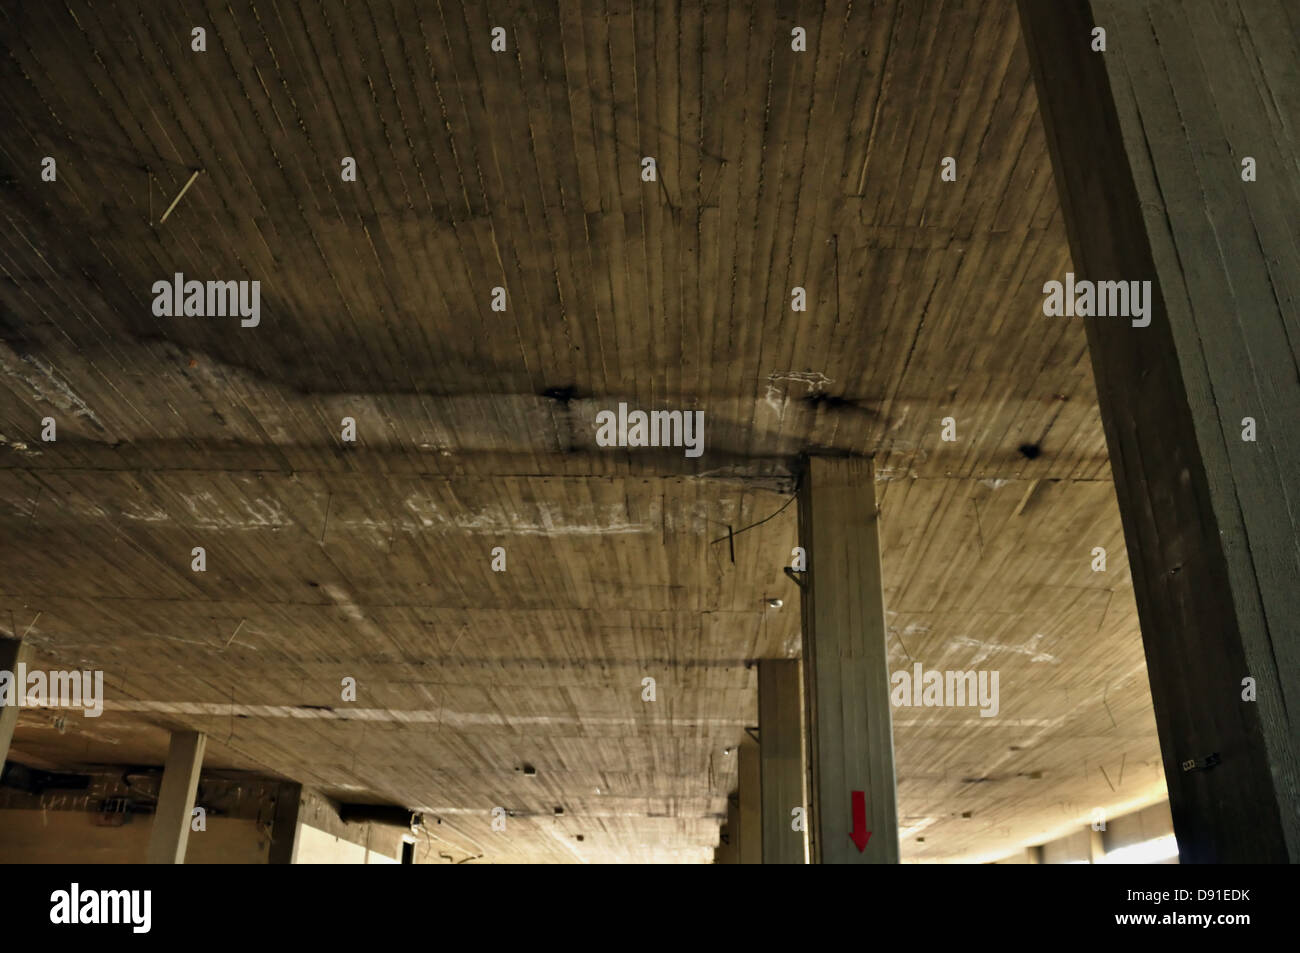 Concrete ceiling and pillars in abandoned factory interior. Industrial architecture. Stock Photo